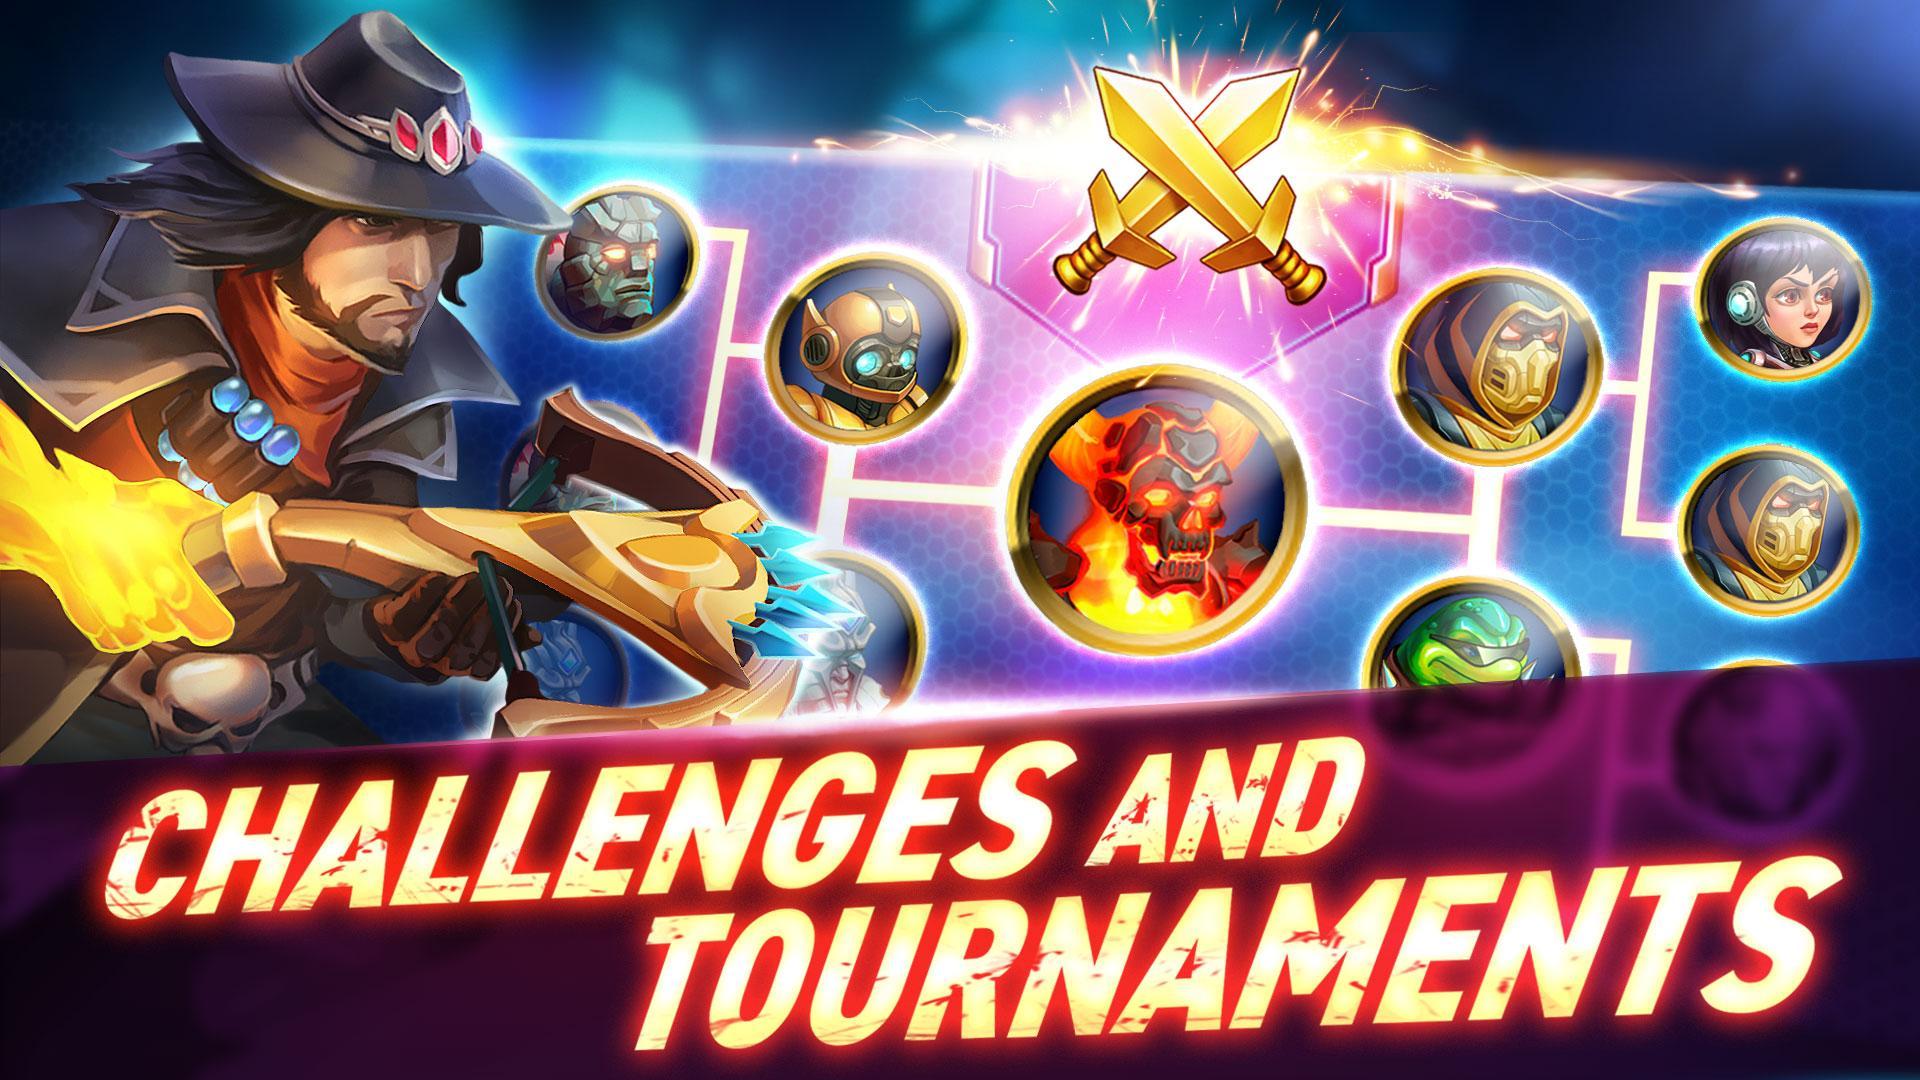 Battle Arena: Heroes Adventure for Android - APK Download - 